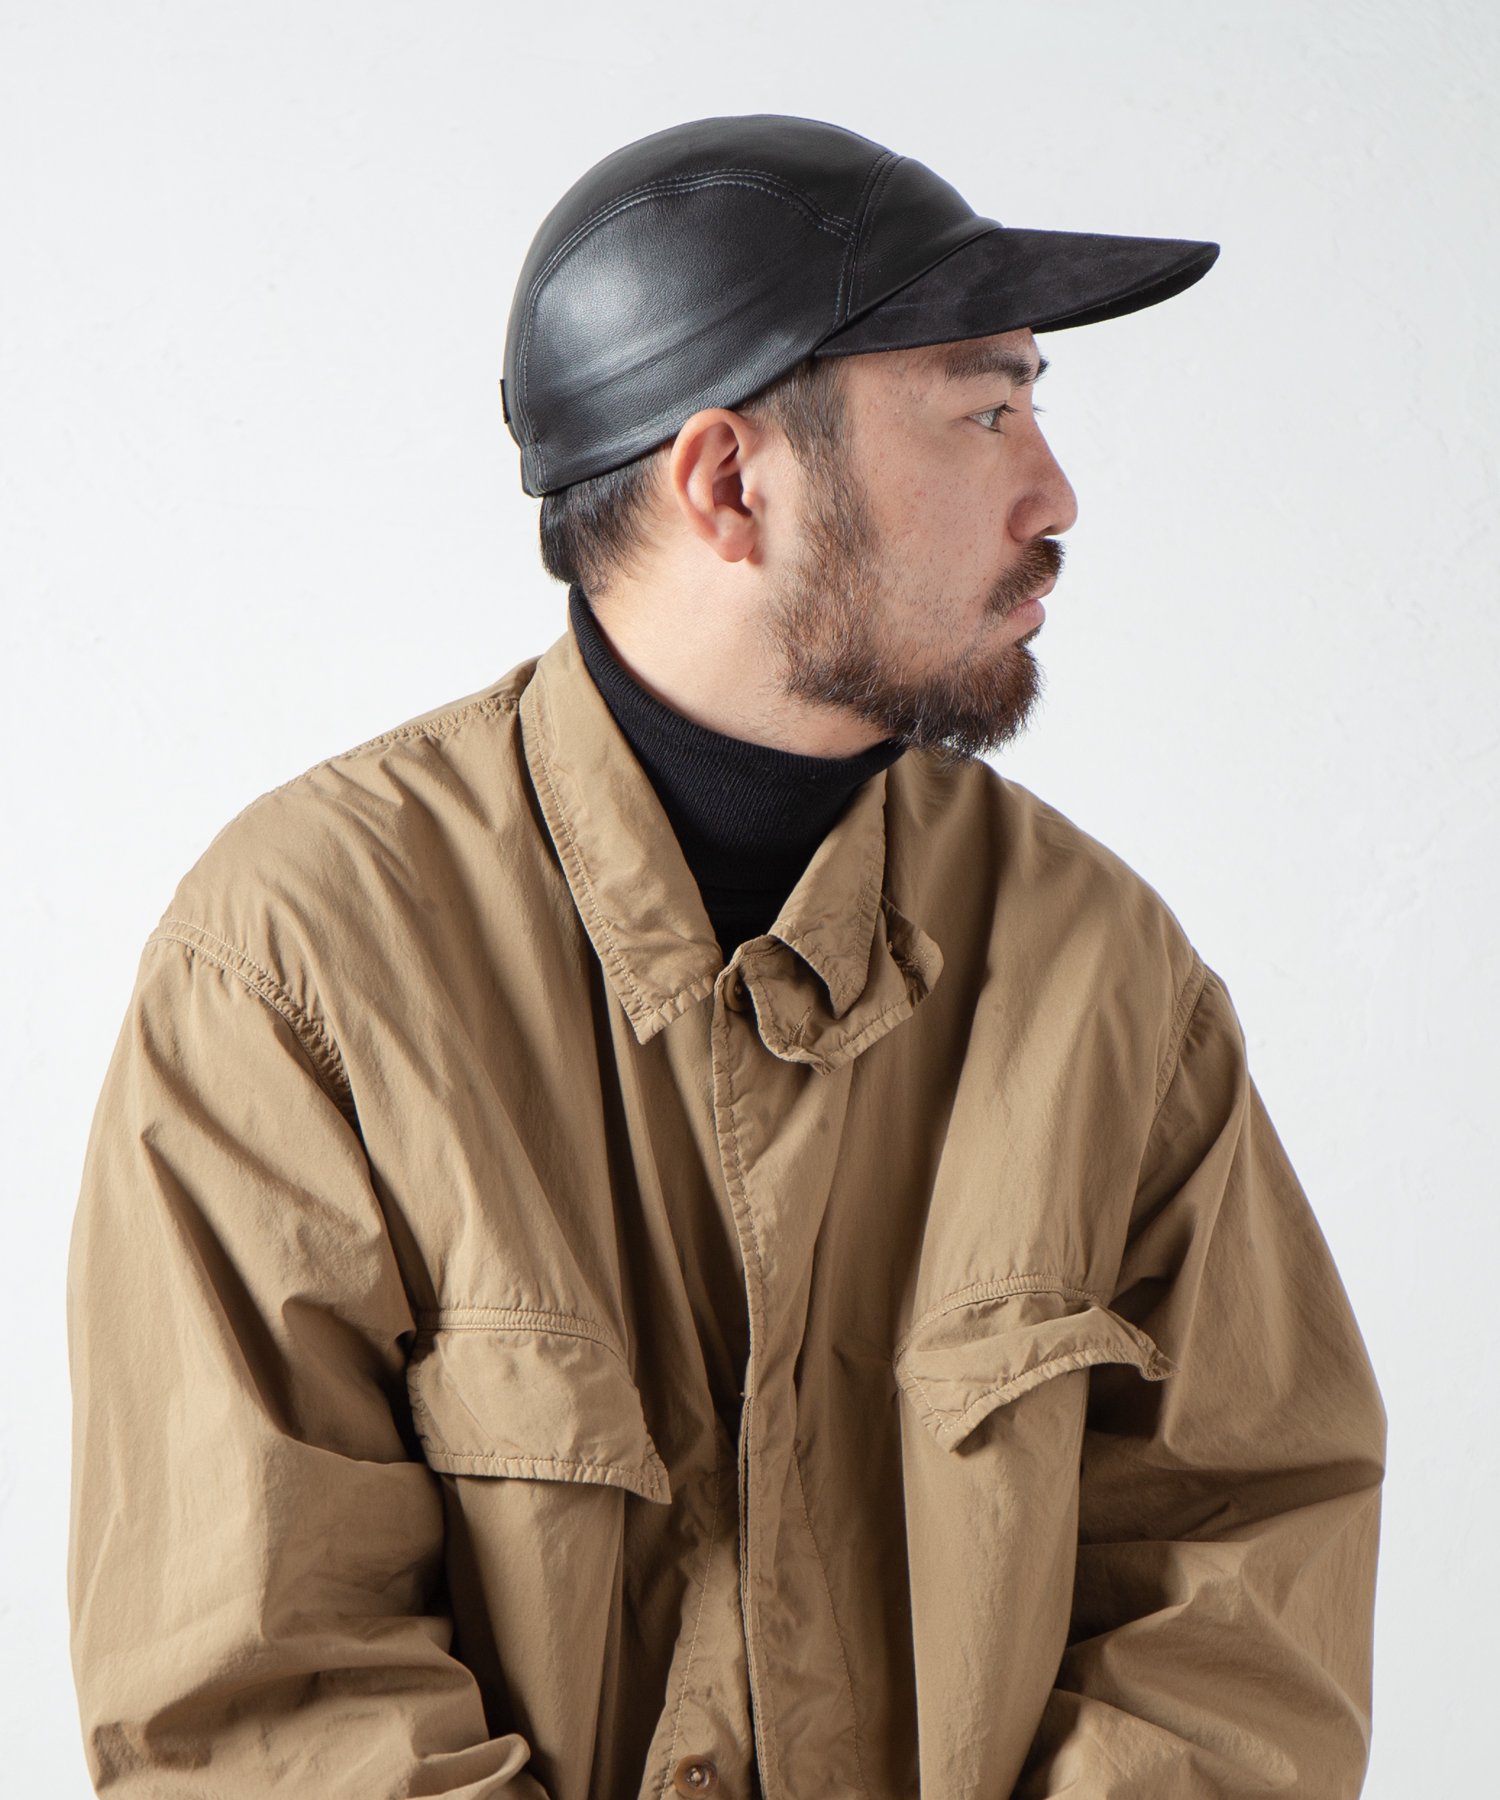 Indietro Association Leather Jet Cap 082 レザージェットキャップ